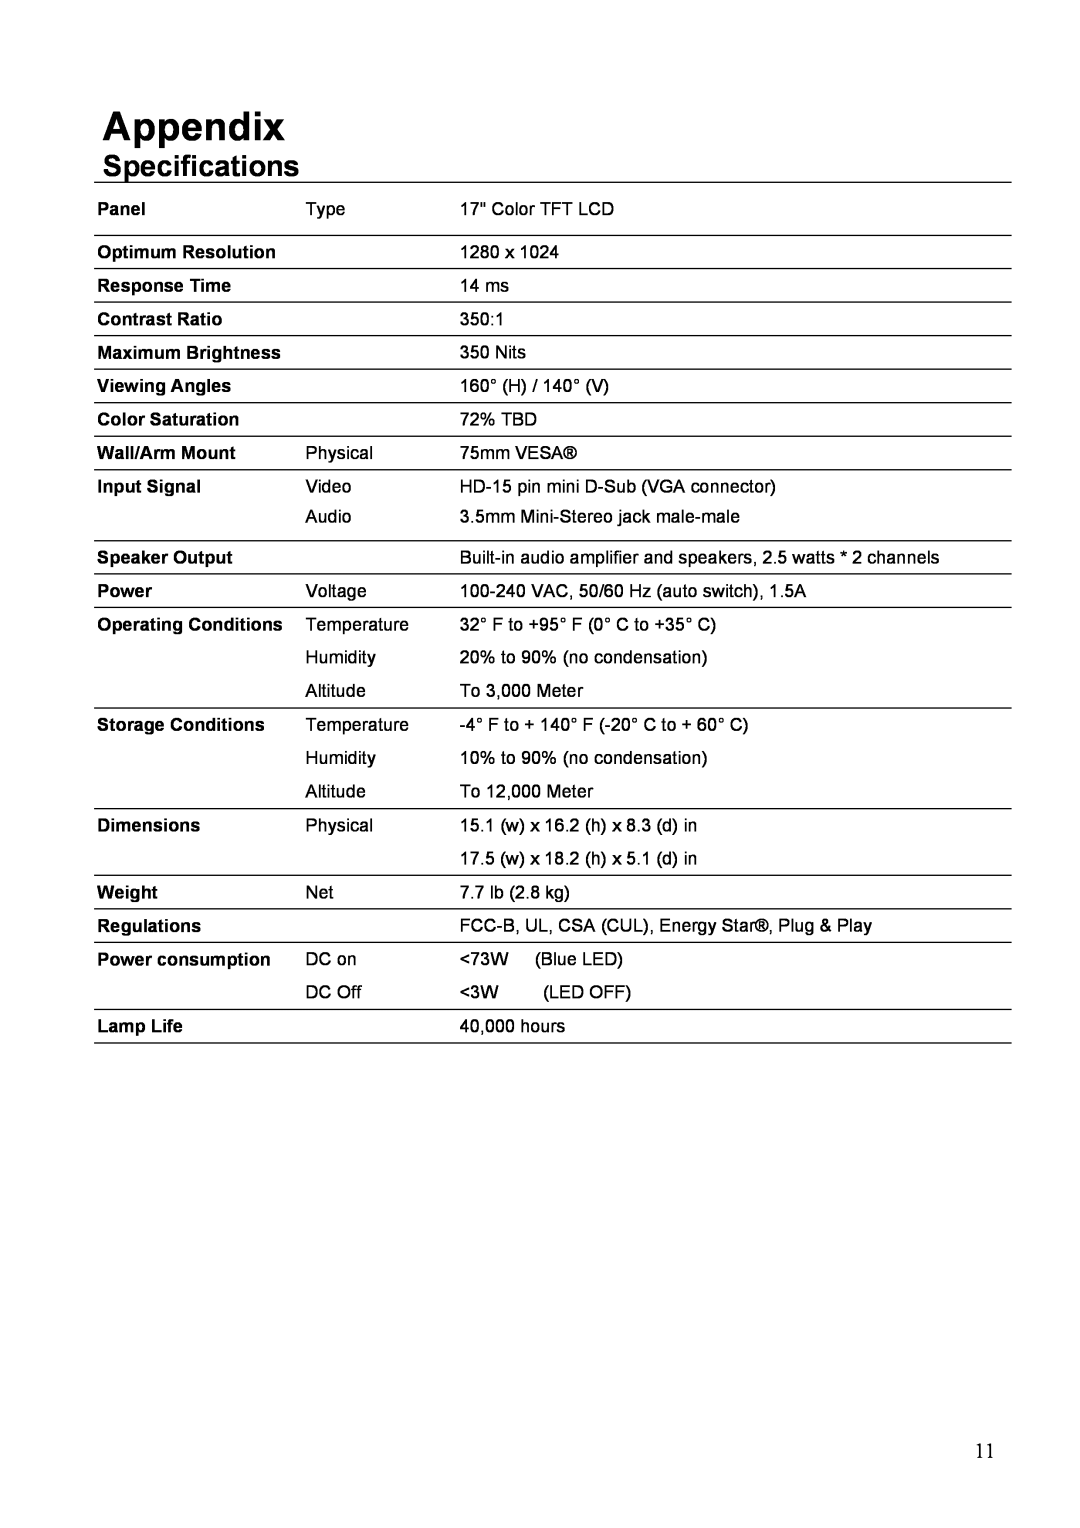 Westinghouse LCM-17v2 manual Appendix, Specifications 